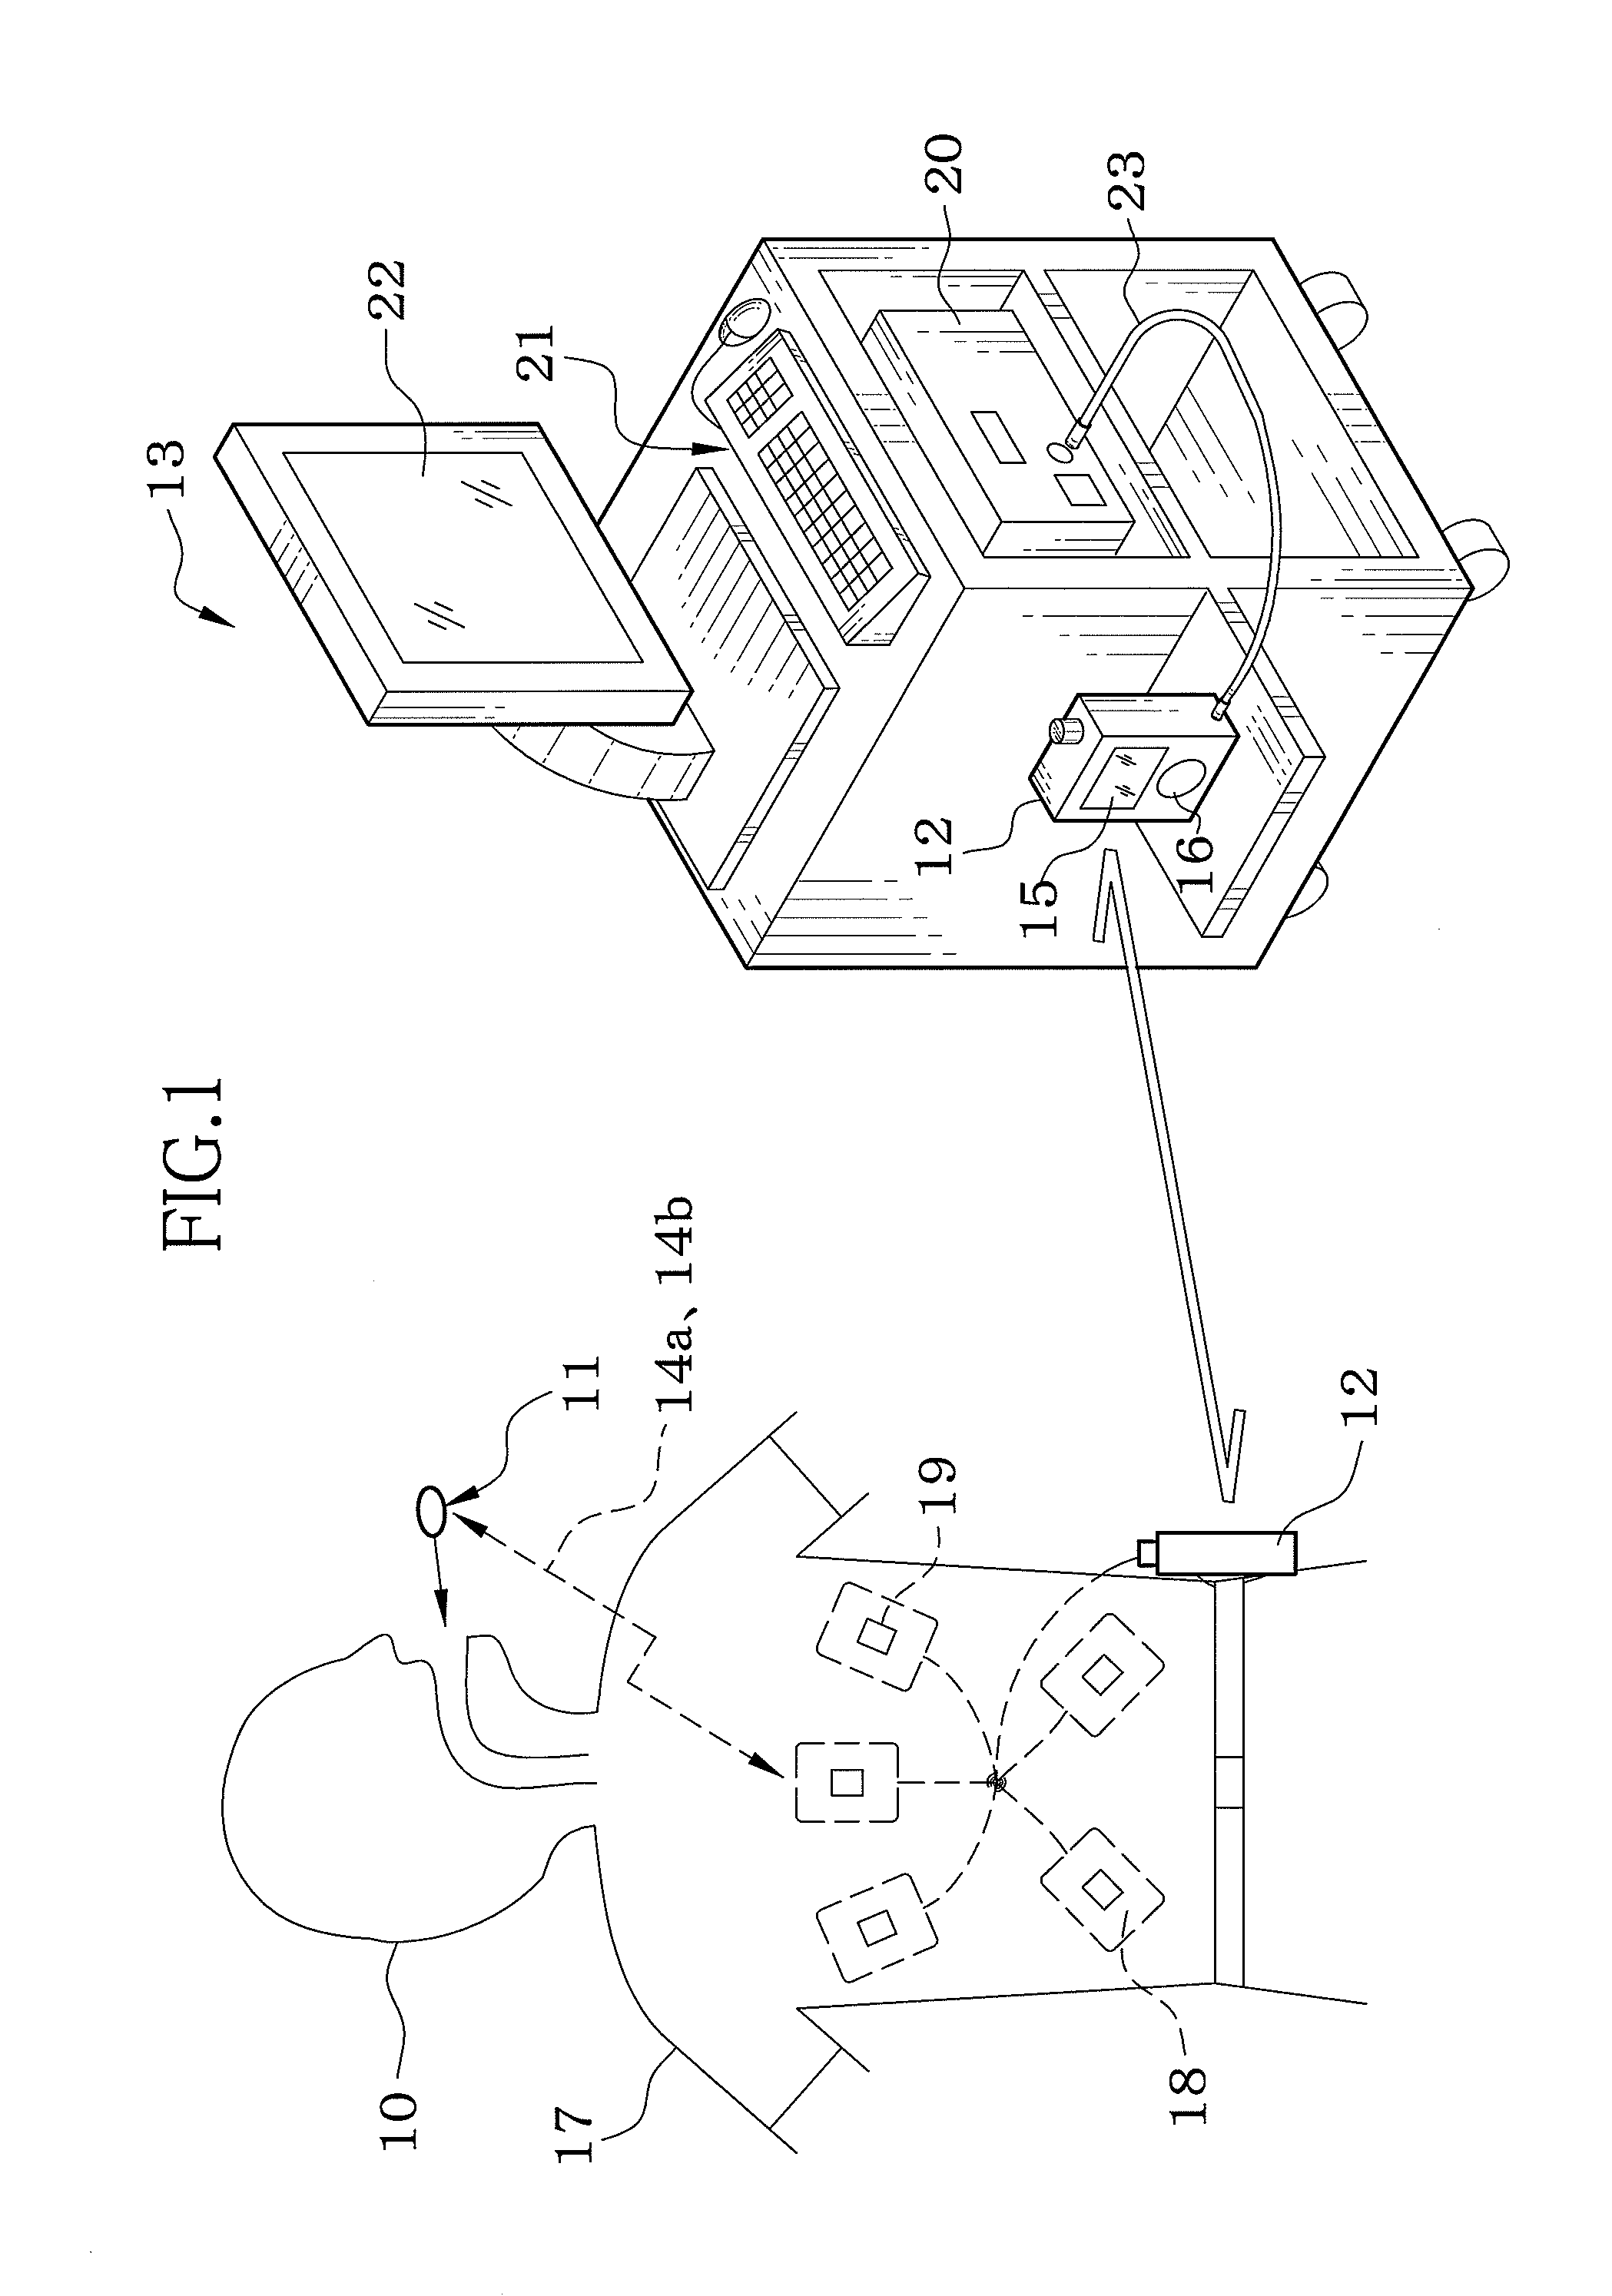 Capsule endoscopic system and operation control method of capsule endoscope